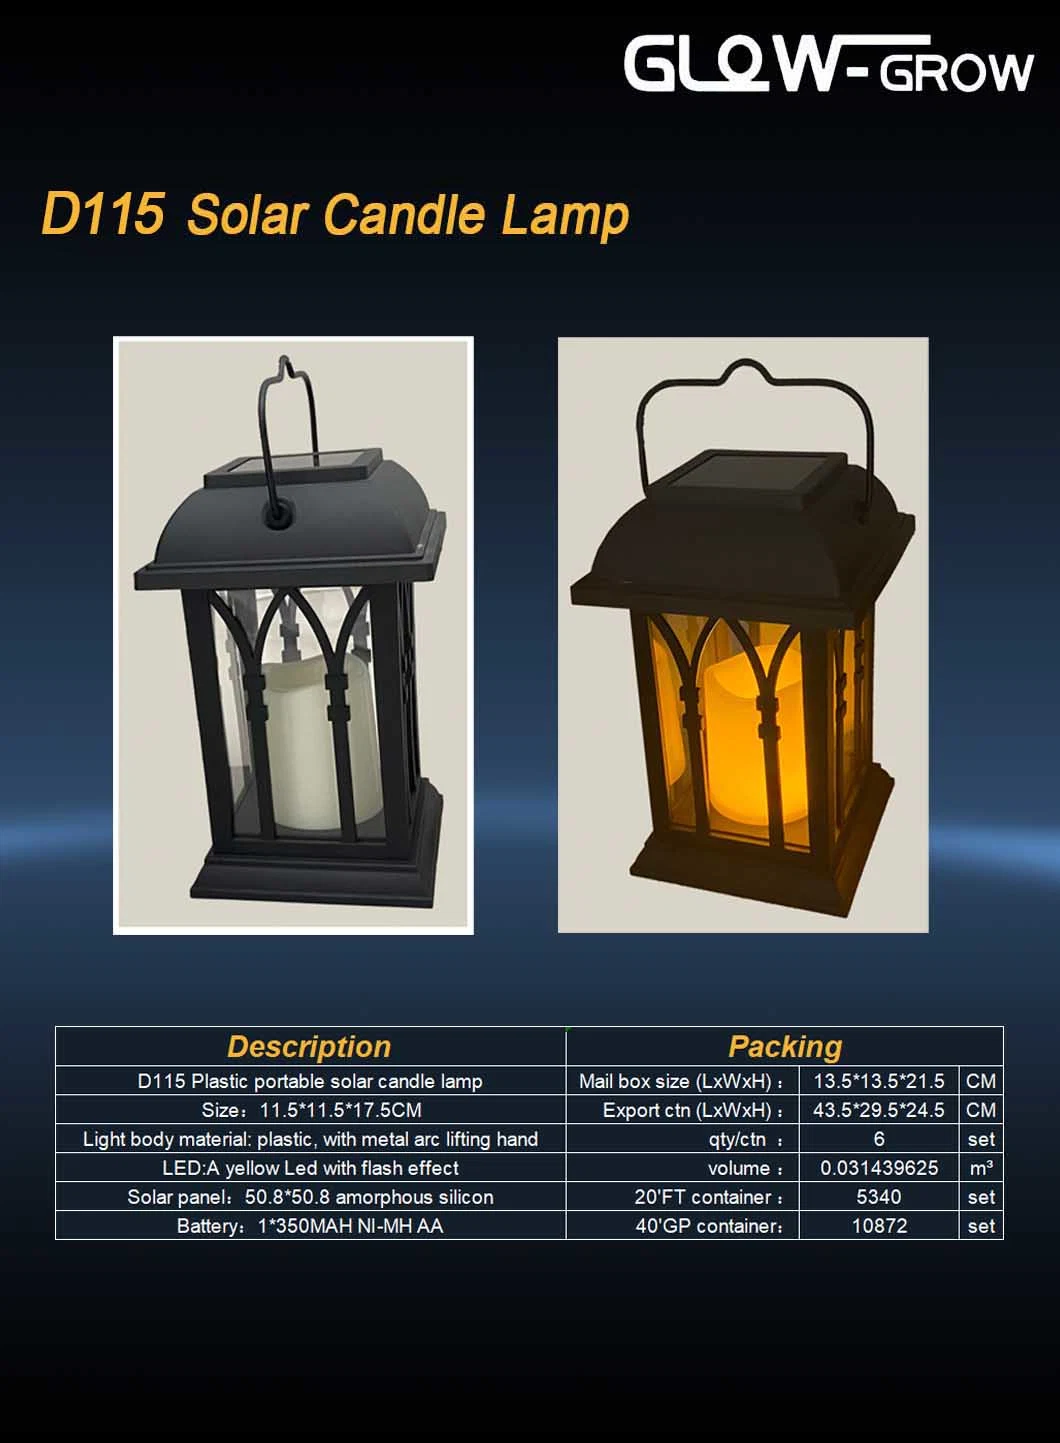 Outdoor Solar Lanterns 6 Inch Black Lantern with Solar Powered LED Candle Waterproof Dusk to Dawn Timer Hanging Table Porch for Ramadan Home Festival Decoration